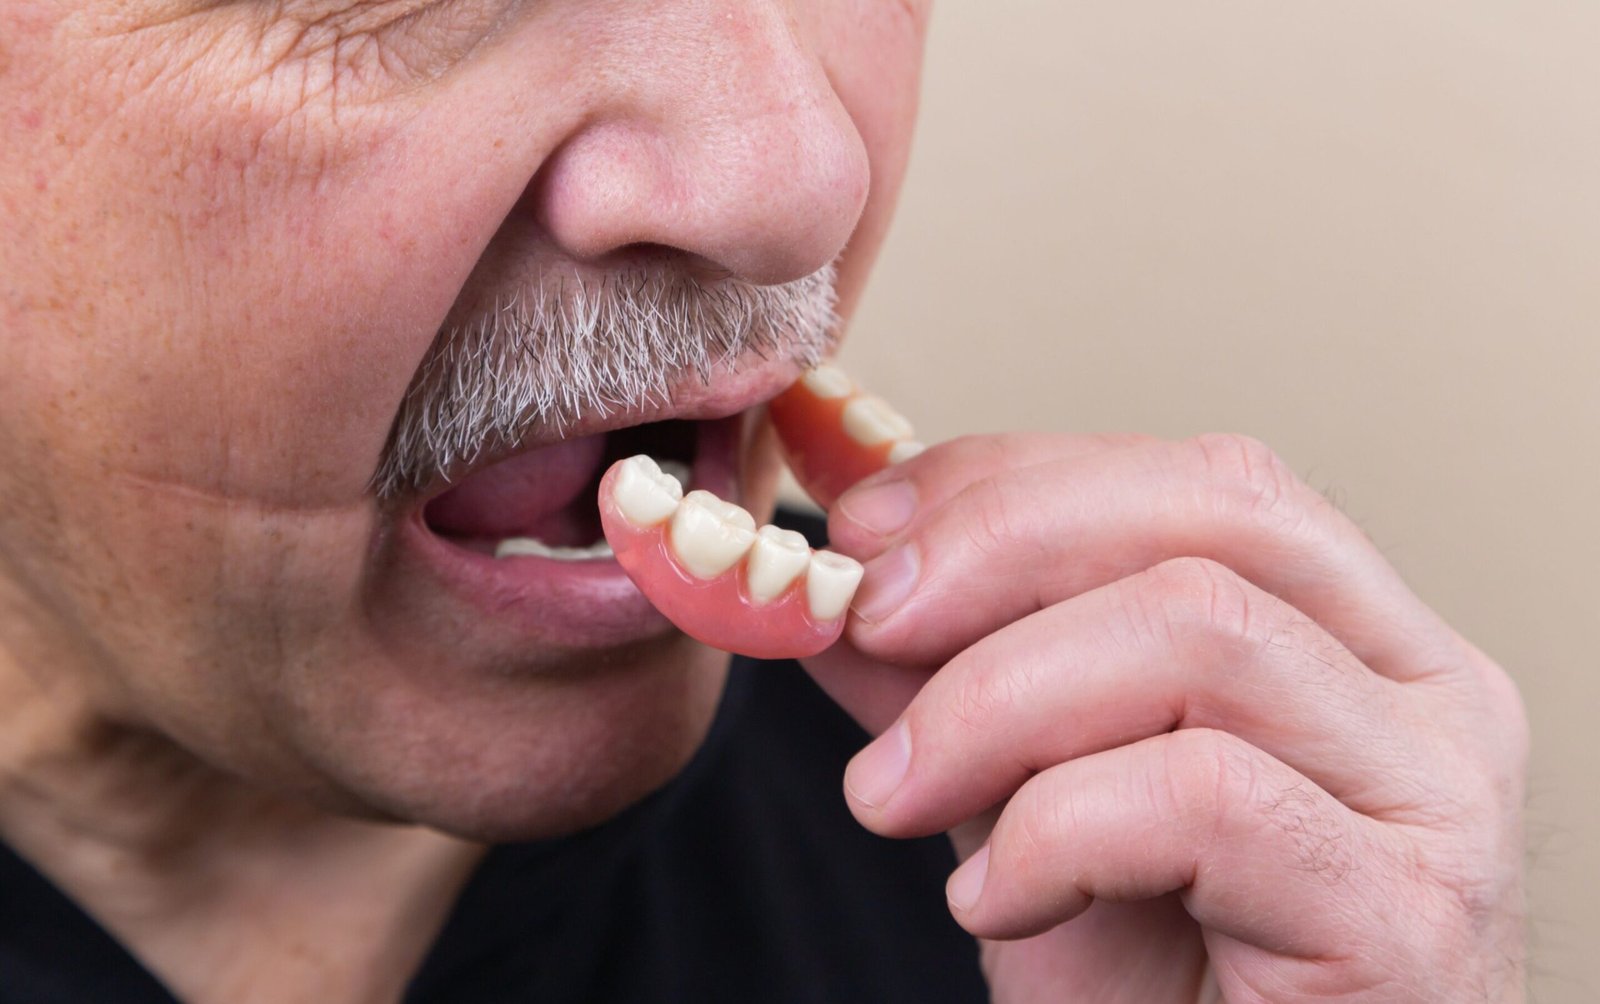 Laboratory model enables researchers to explore the mouth’s response to oral disease